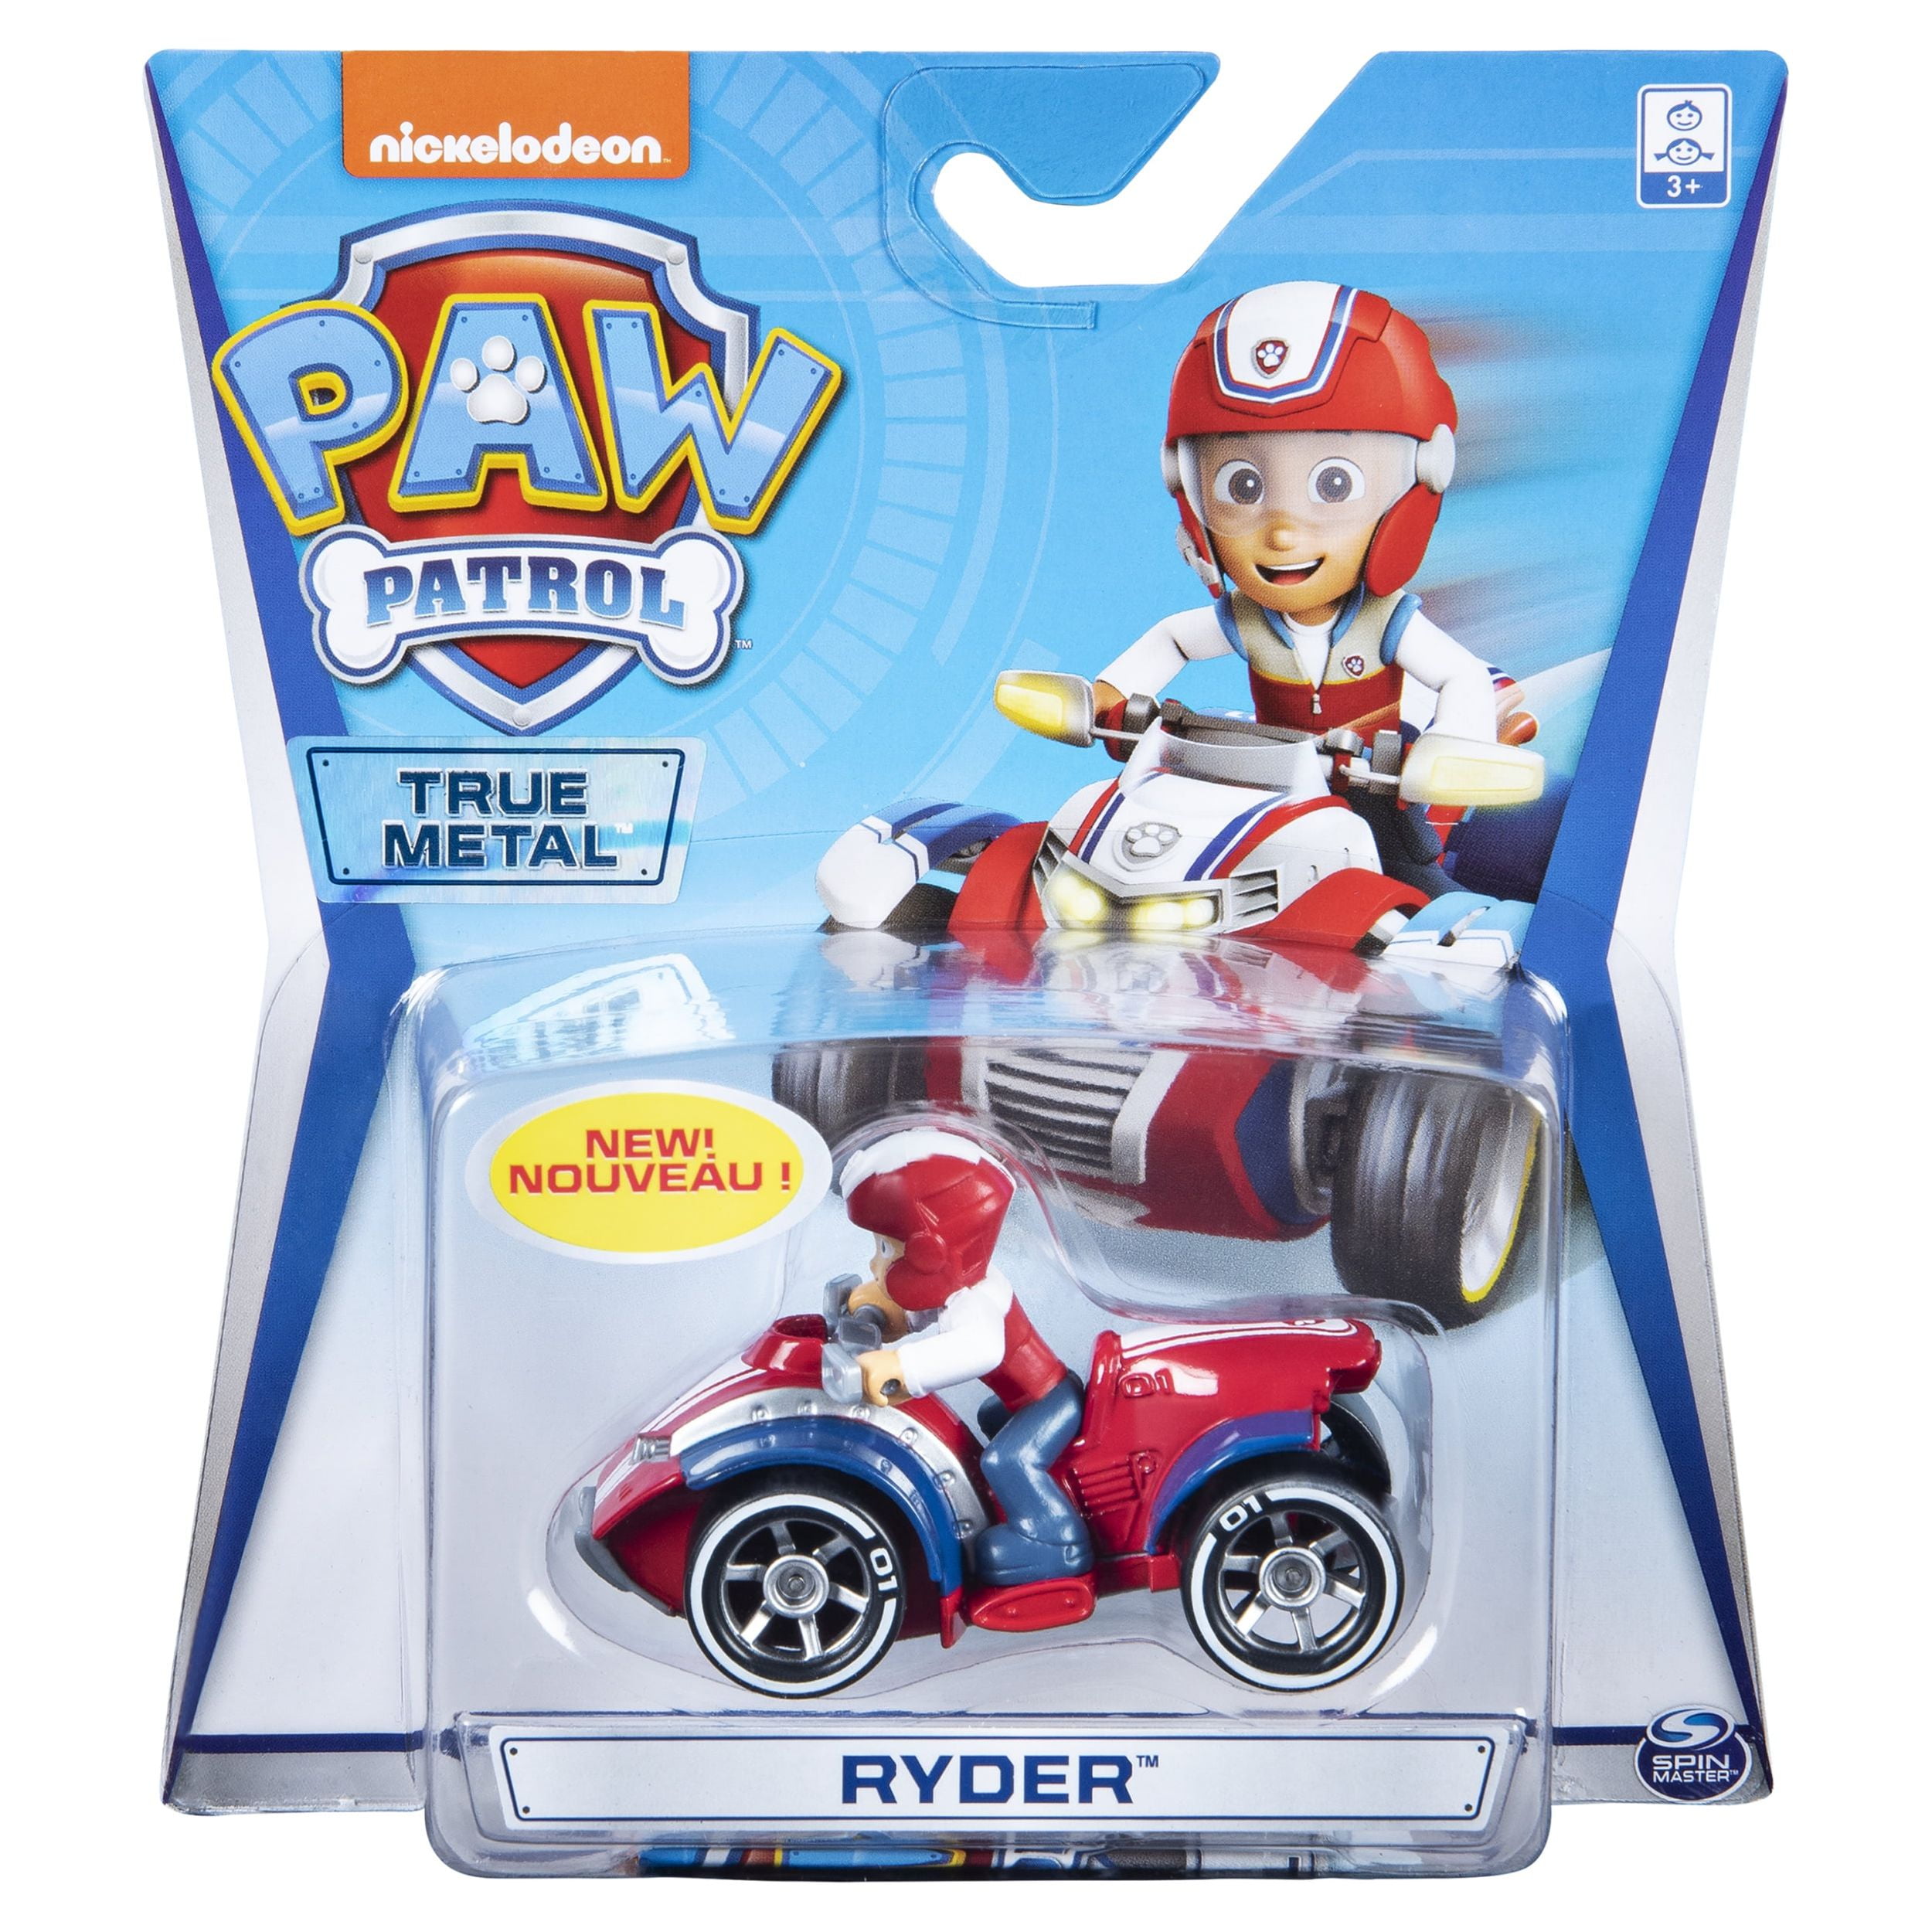  Paw Patrol, True Metal PAW Patroller Die-Cast Team Vehicle with  1:55 Scale Ryder ATV Toy Car, Kids Toys for Ages 3 and up : Toys & Games